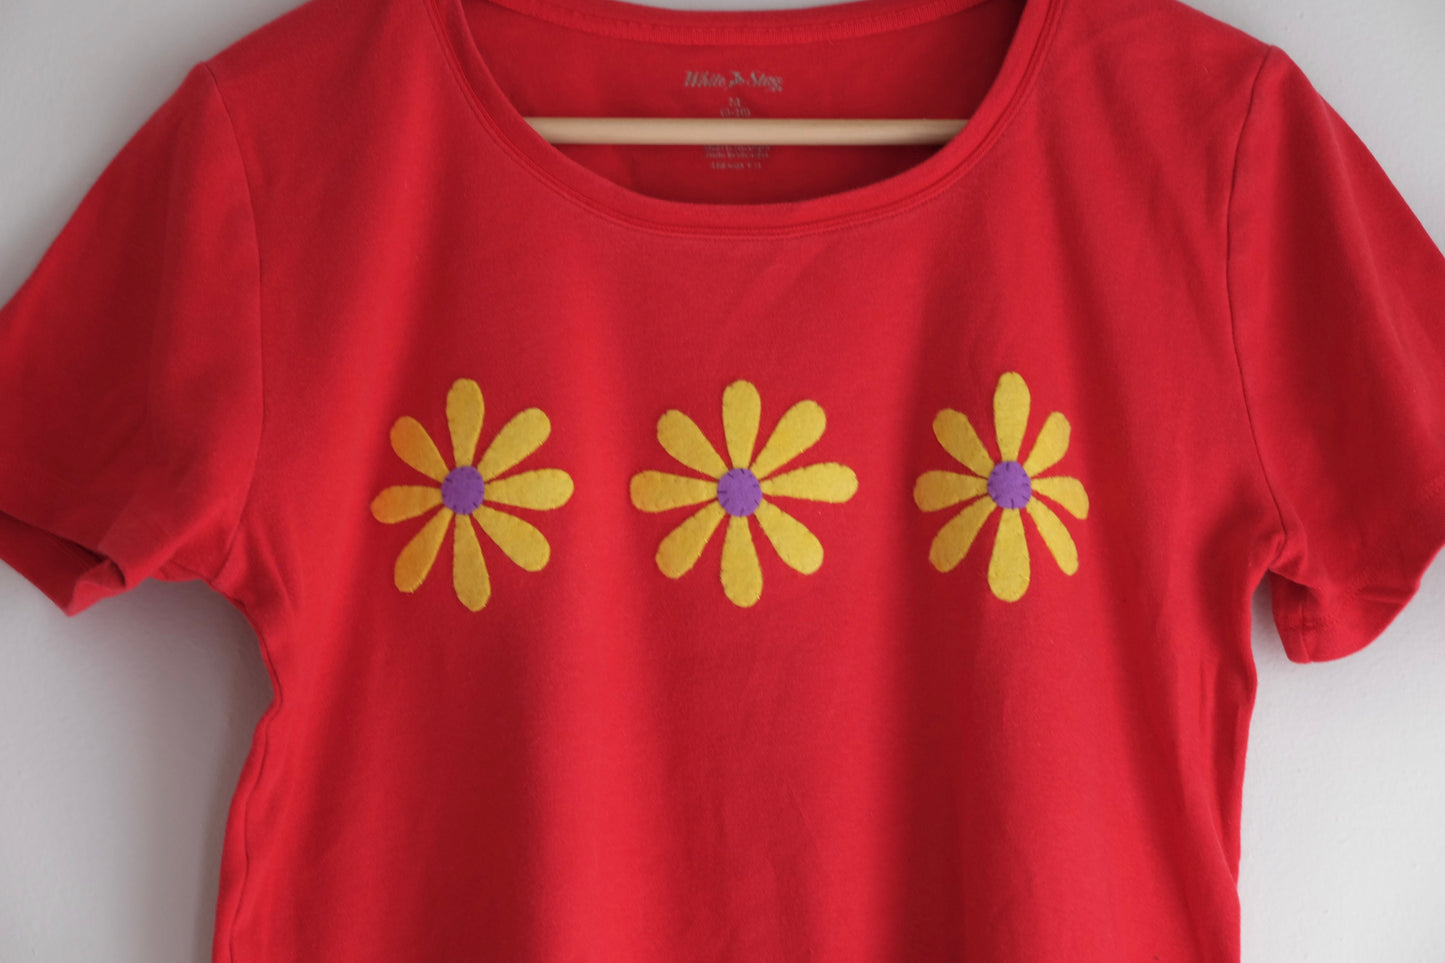 red t-shirt with flowers